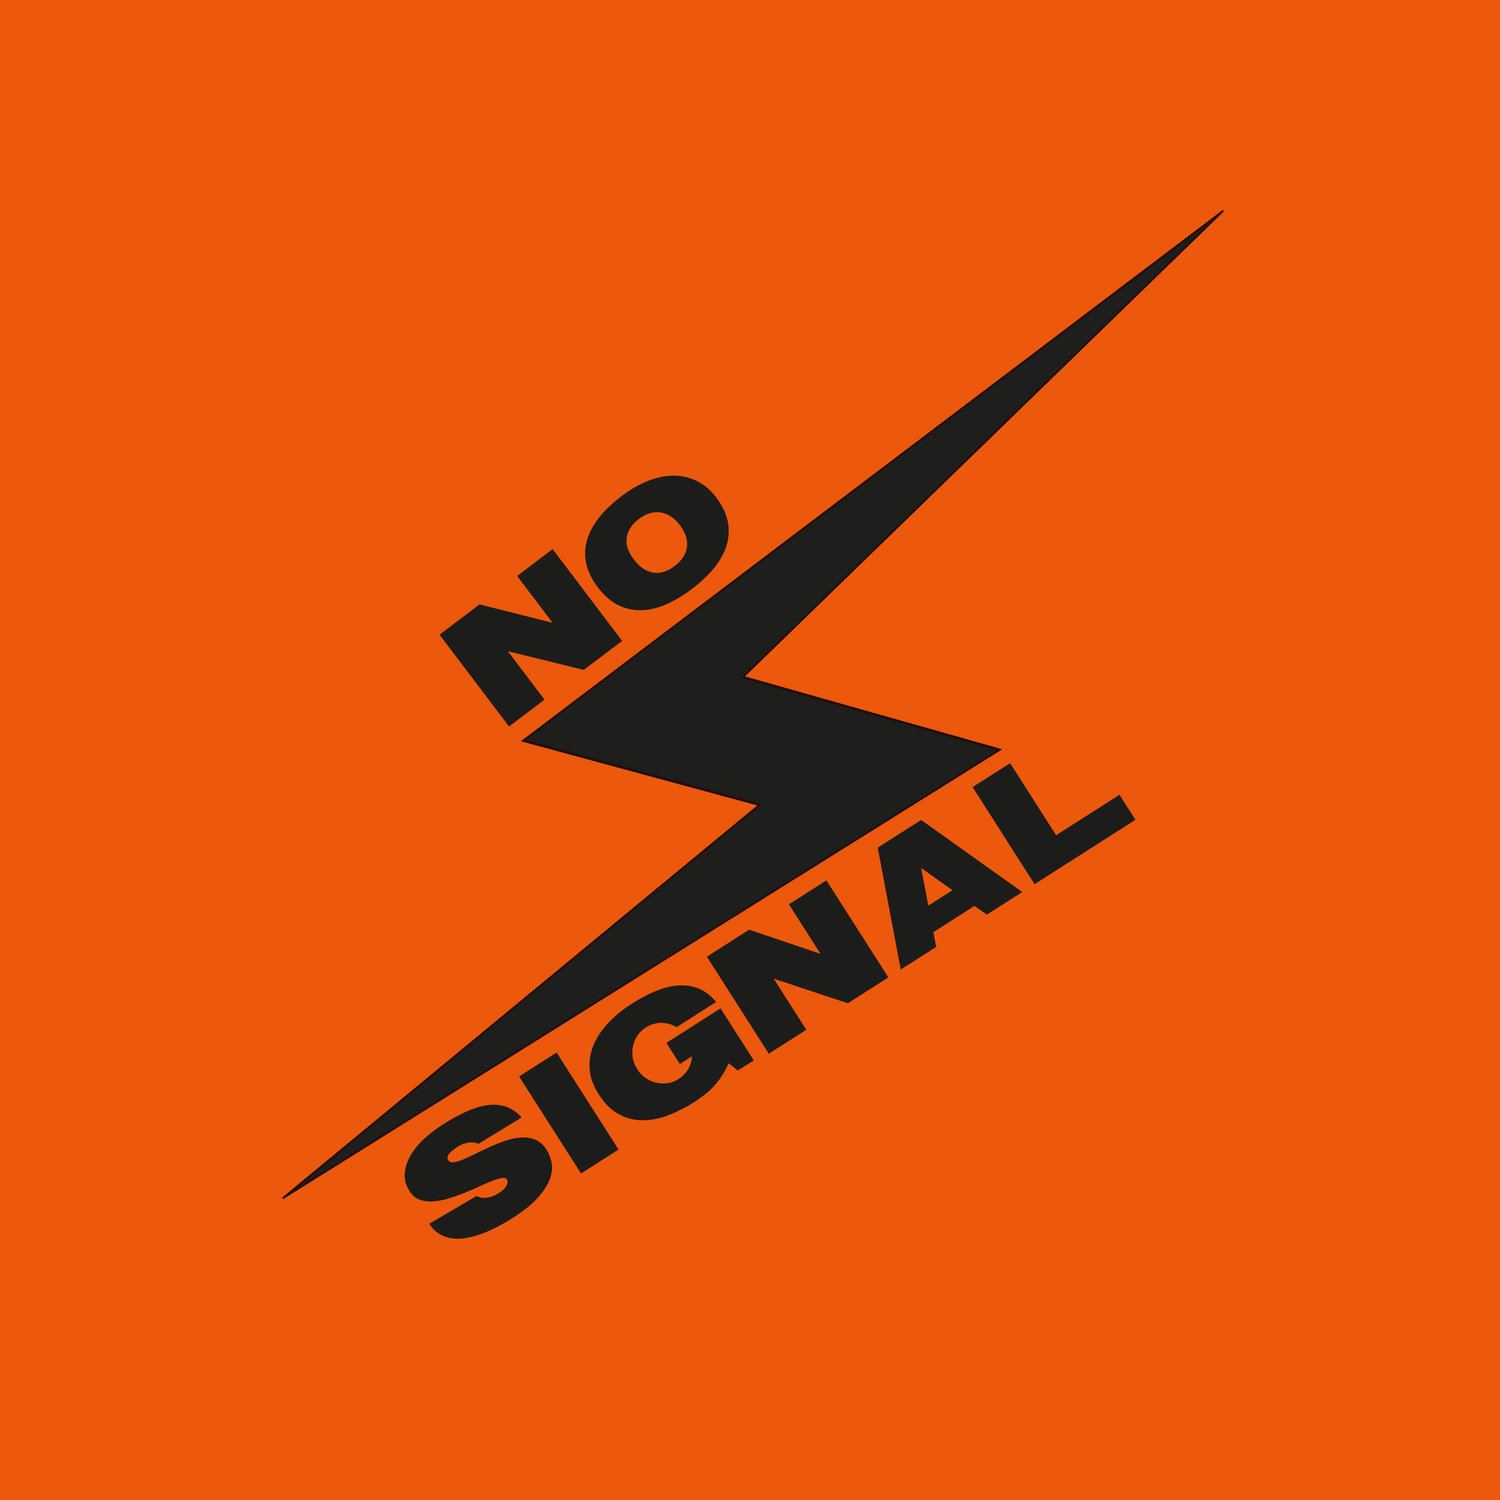 No Signal [@theresnosignall] And The Re-emergence Of Black Radio In The UK [by @TochiChels]